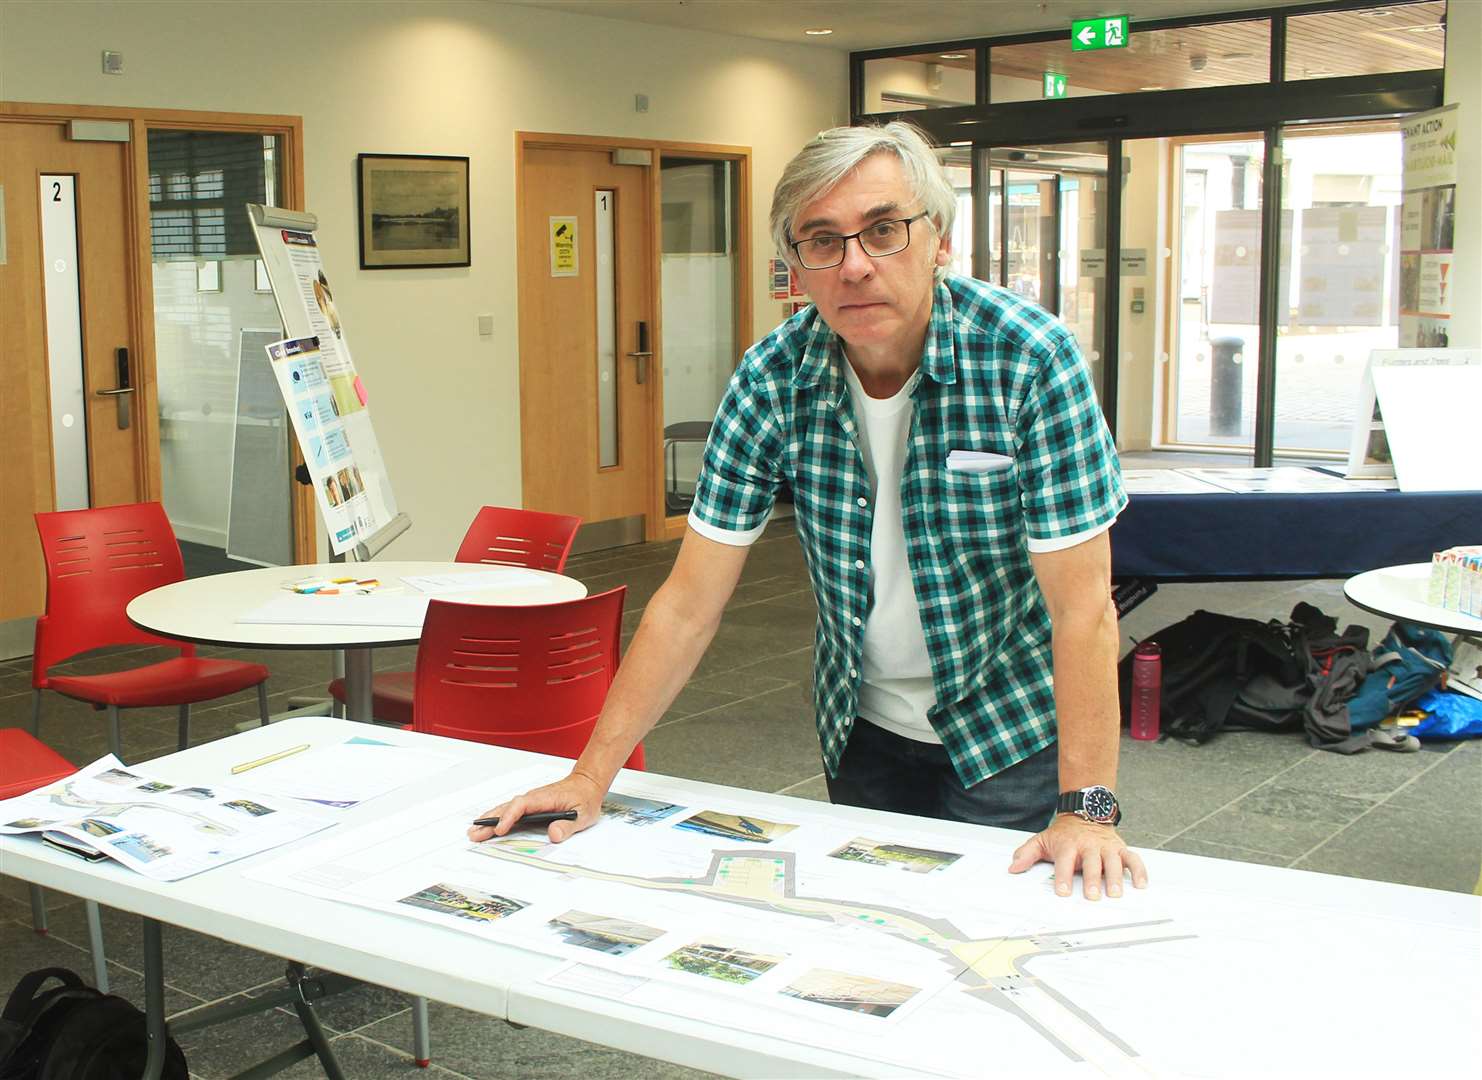 Allan Farquhar, chairman of the Royal Burgh of Wick Community Council, looking over some of the design ideas during the Wick Lanes Pocket Places drop-in event this week. Picture: Alan Hendry